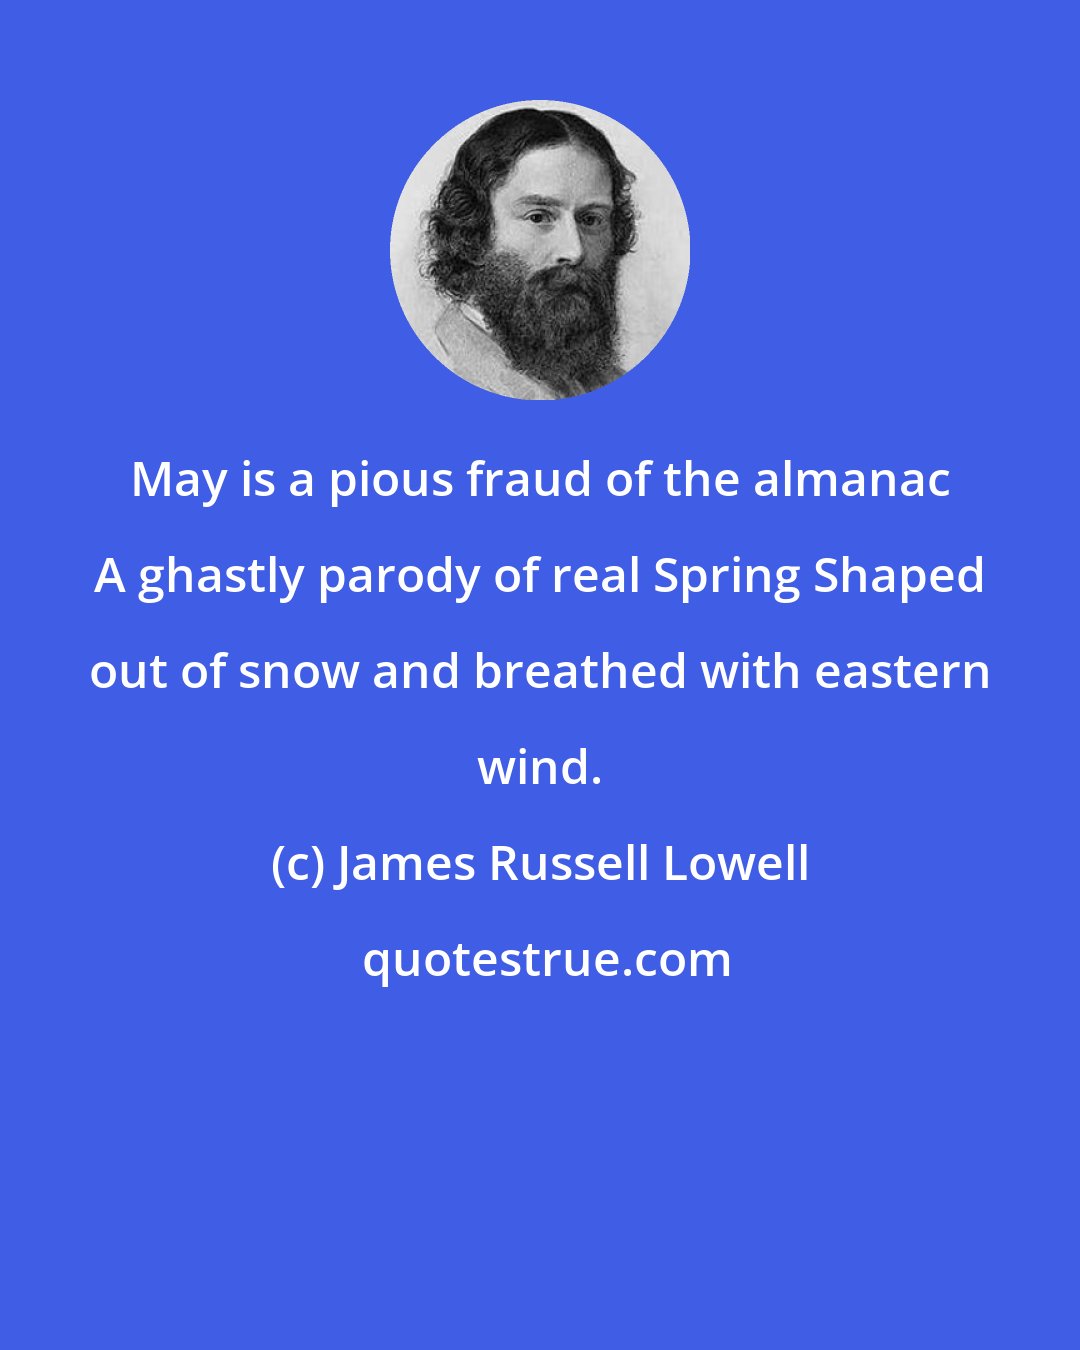 James Russell Lowell: May is a pious fraud of the almanac A ghastly parody of real Spring Shaped out of snow and breathed with eastern wind.